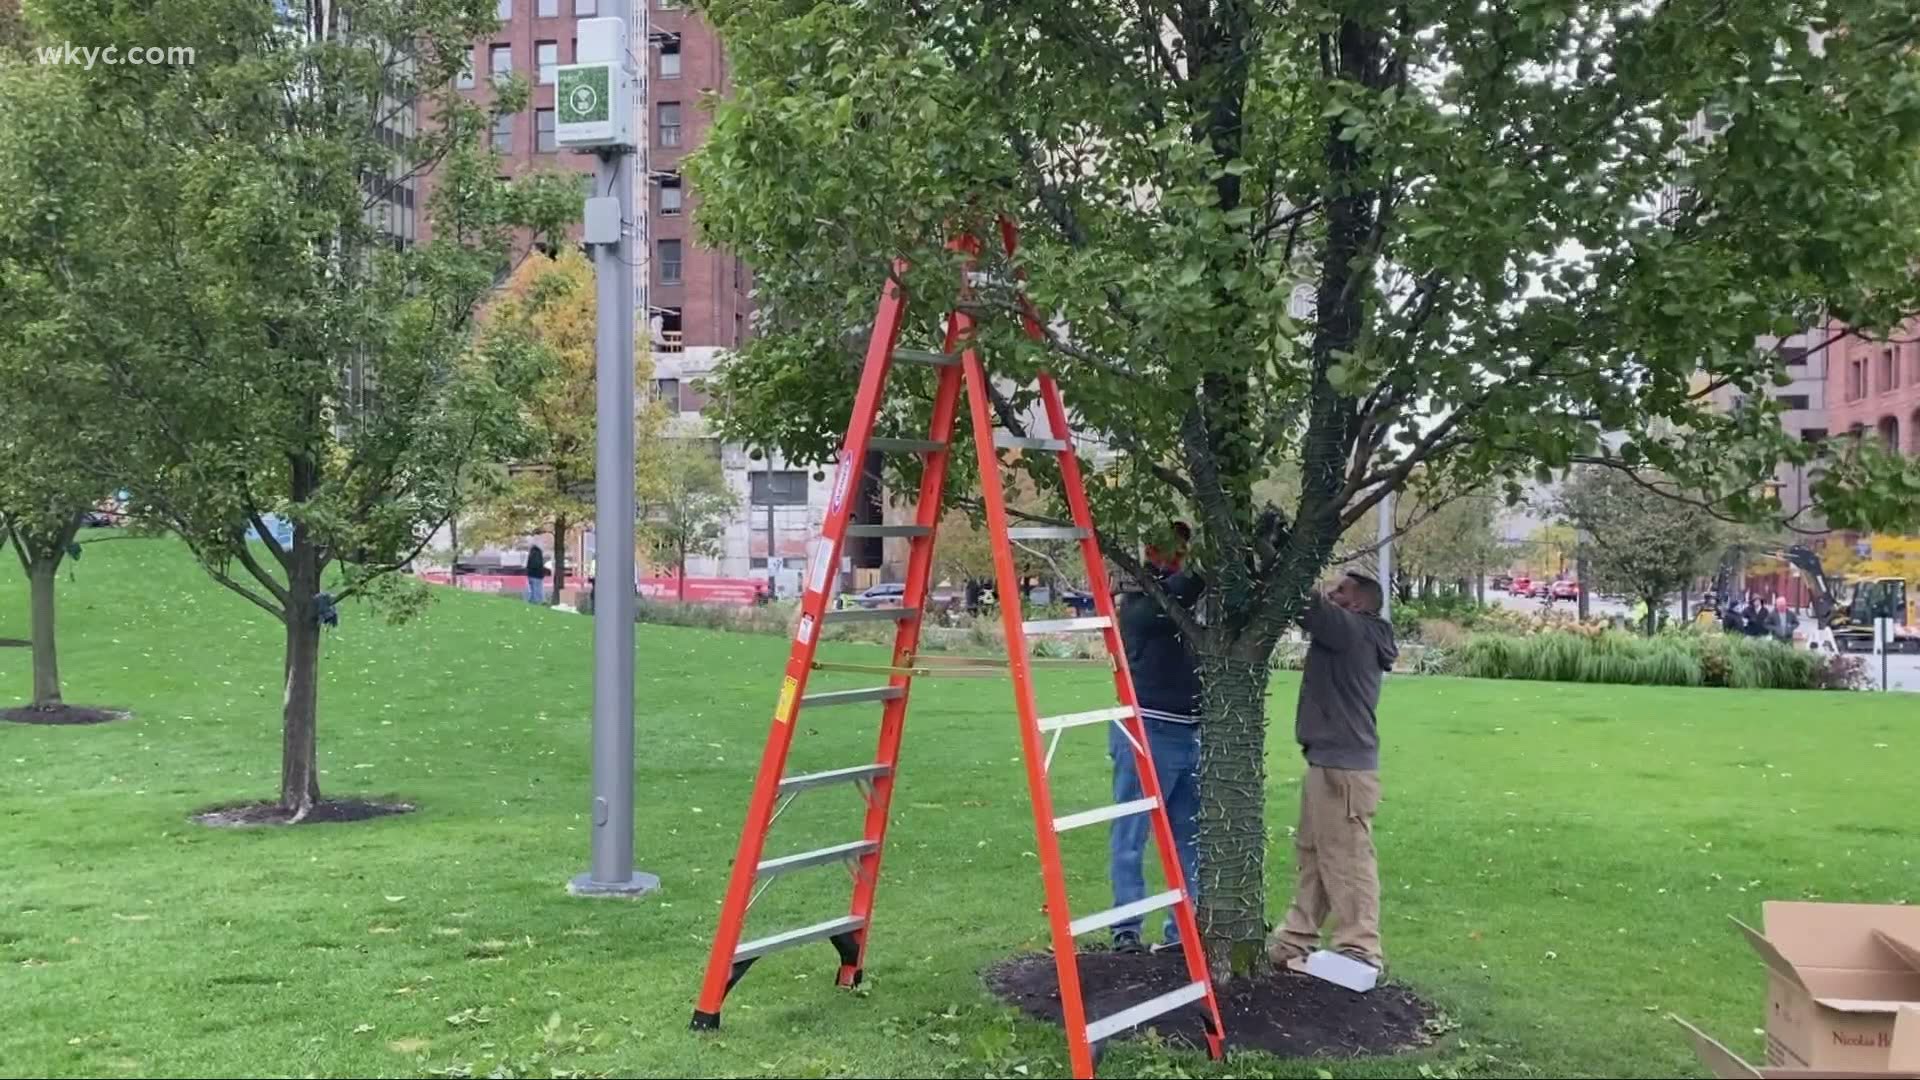 We found crews putting up Christmas lights earlier today around the trees in downtown Cleveland.  Cleveland is already getting in the Holiday spirit.